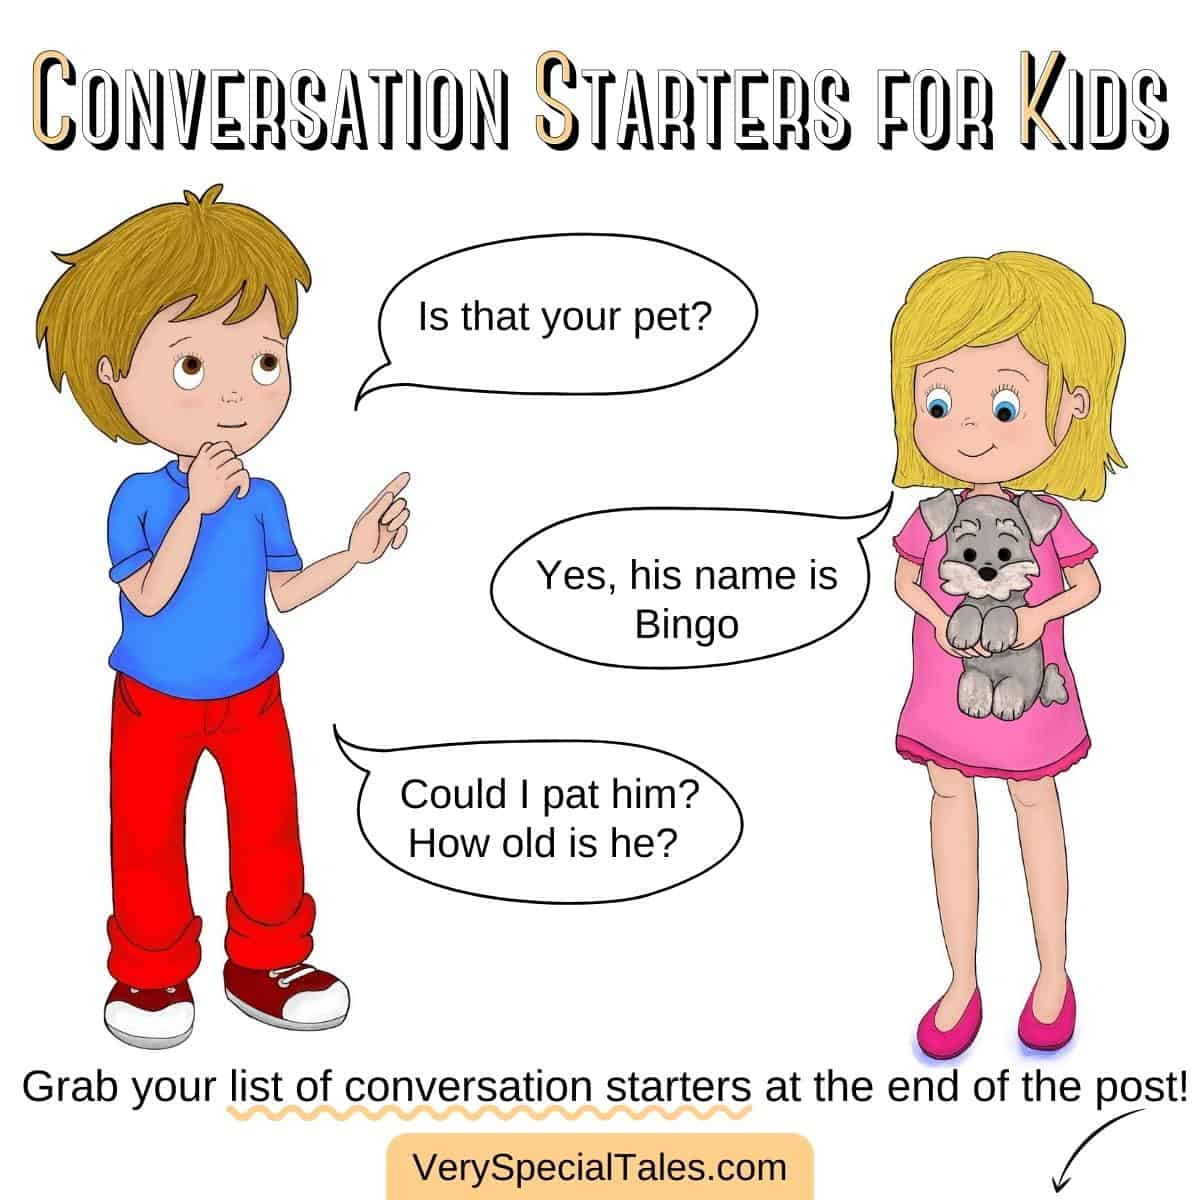 68 Conversation Starters for Kids: Fun Questions for Greetings,  Compliments, Sharing, Joining In and More! - Very Special Tales